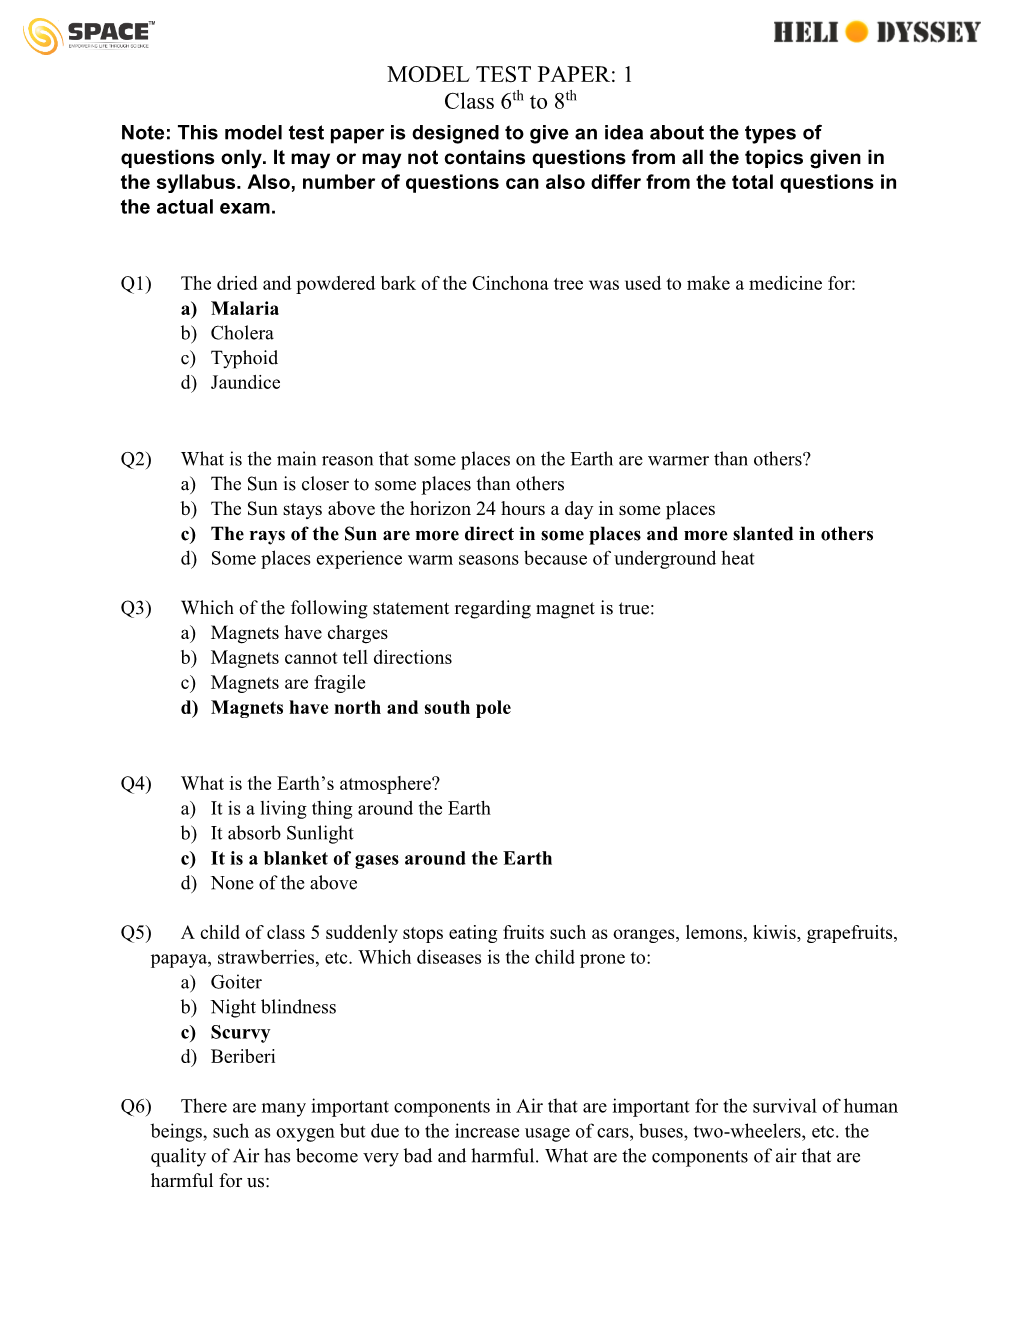 MODEL TEST PAPER: 1 Class 6Th to 8Th Note: This Model Test Paper Is Designed to Give an Idea About the Types of Questions Only